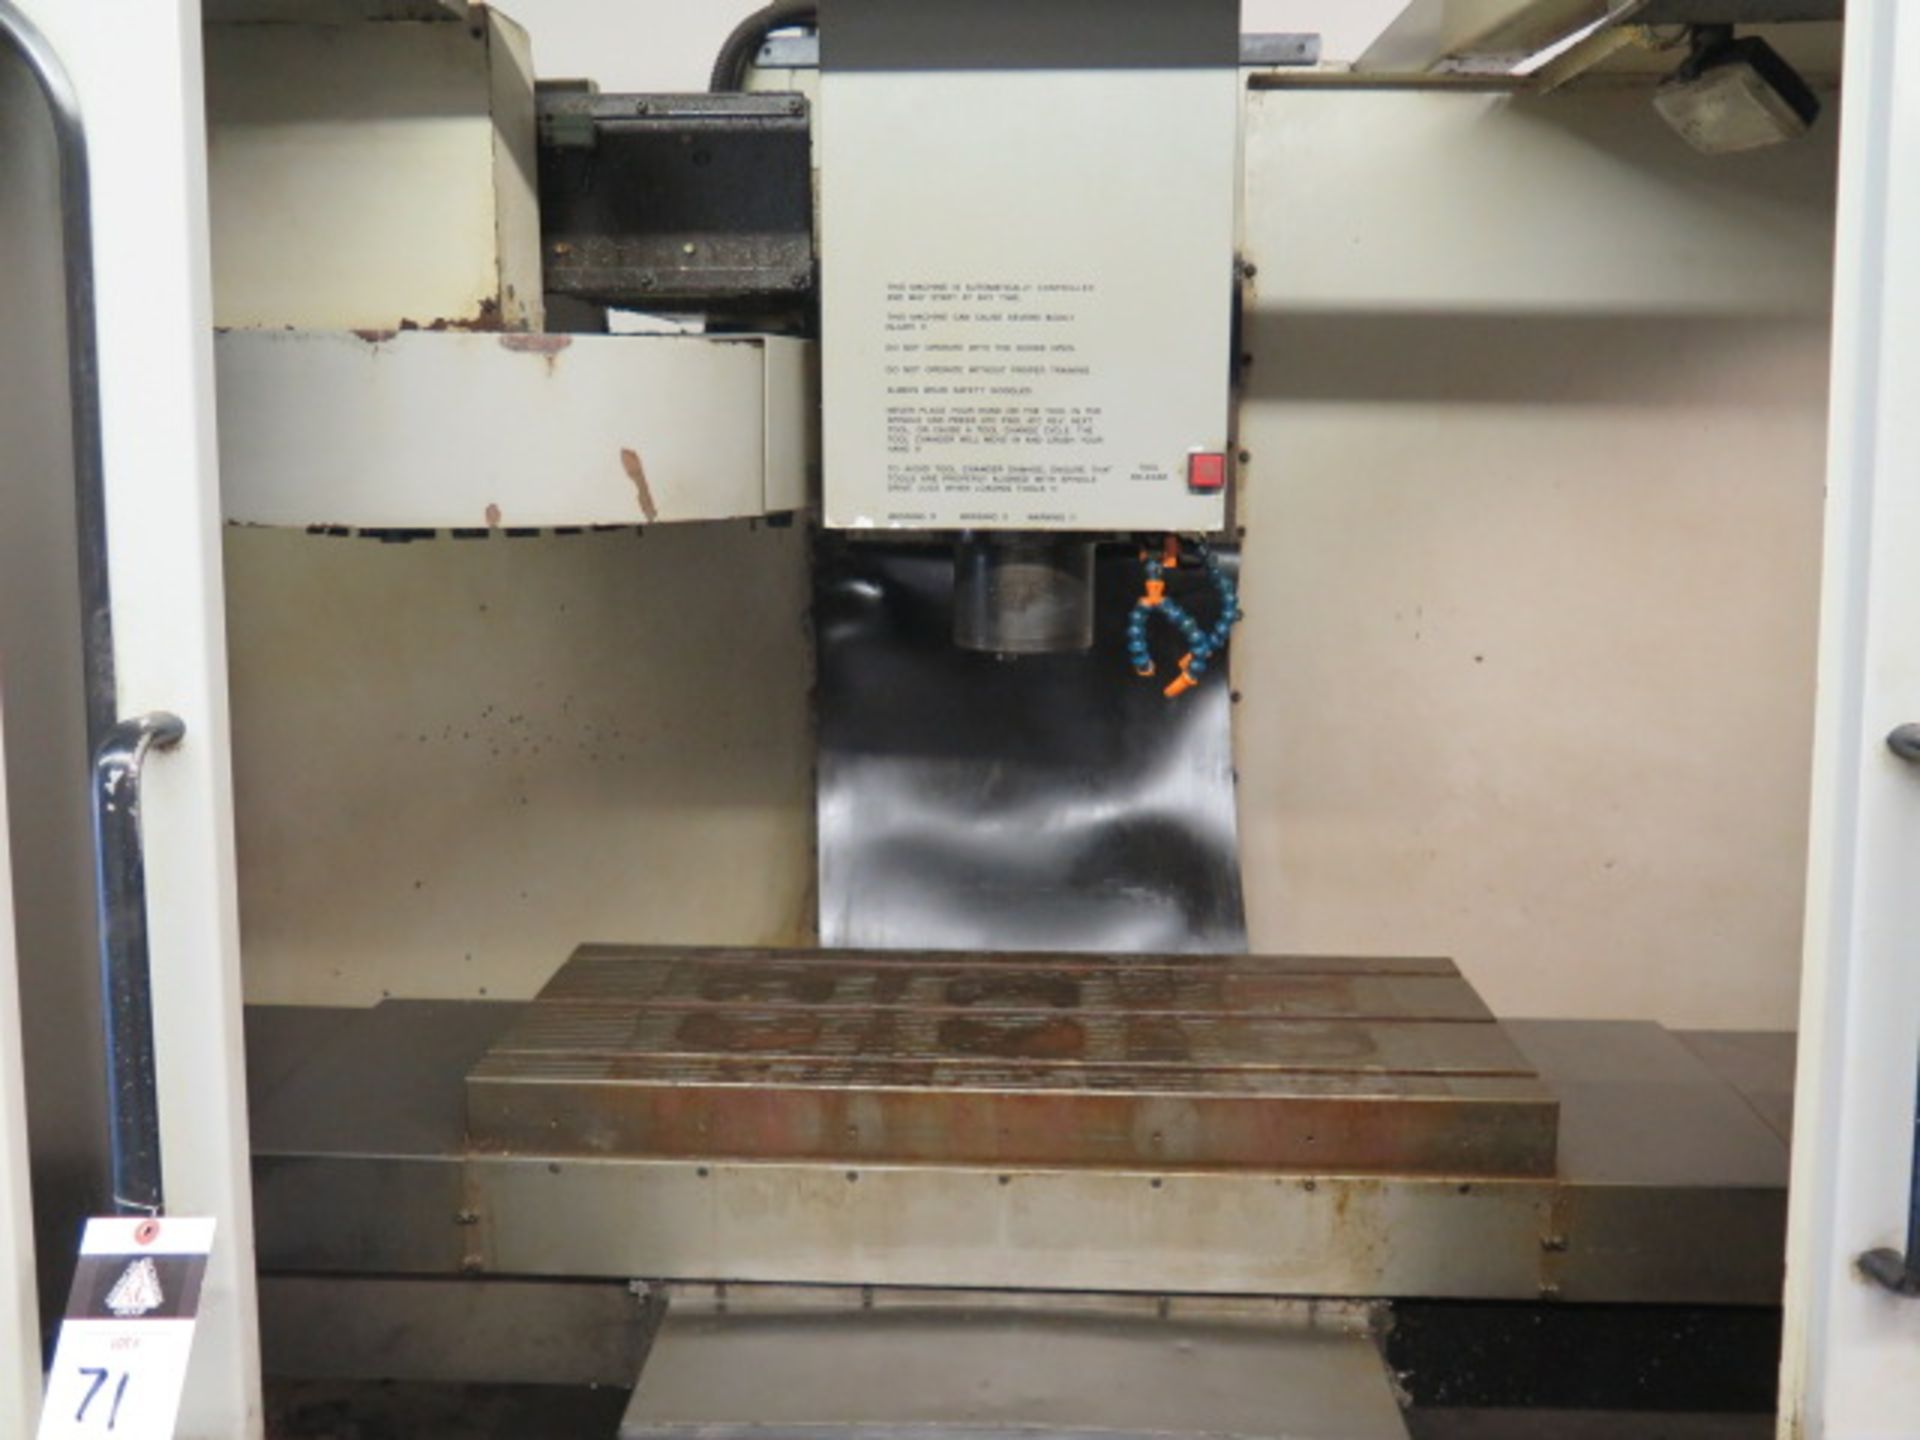 1994 Haas VF-2 CNC VMC, s/n 3258 w/ Haas Controls, 20-Station ATC, CAT-40 Taper, SOLD AS IS - Image 5 of 16